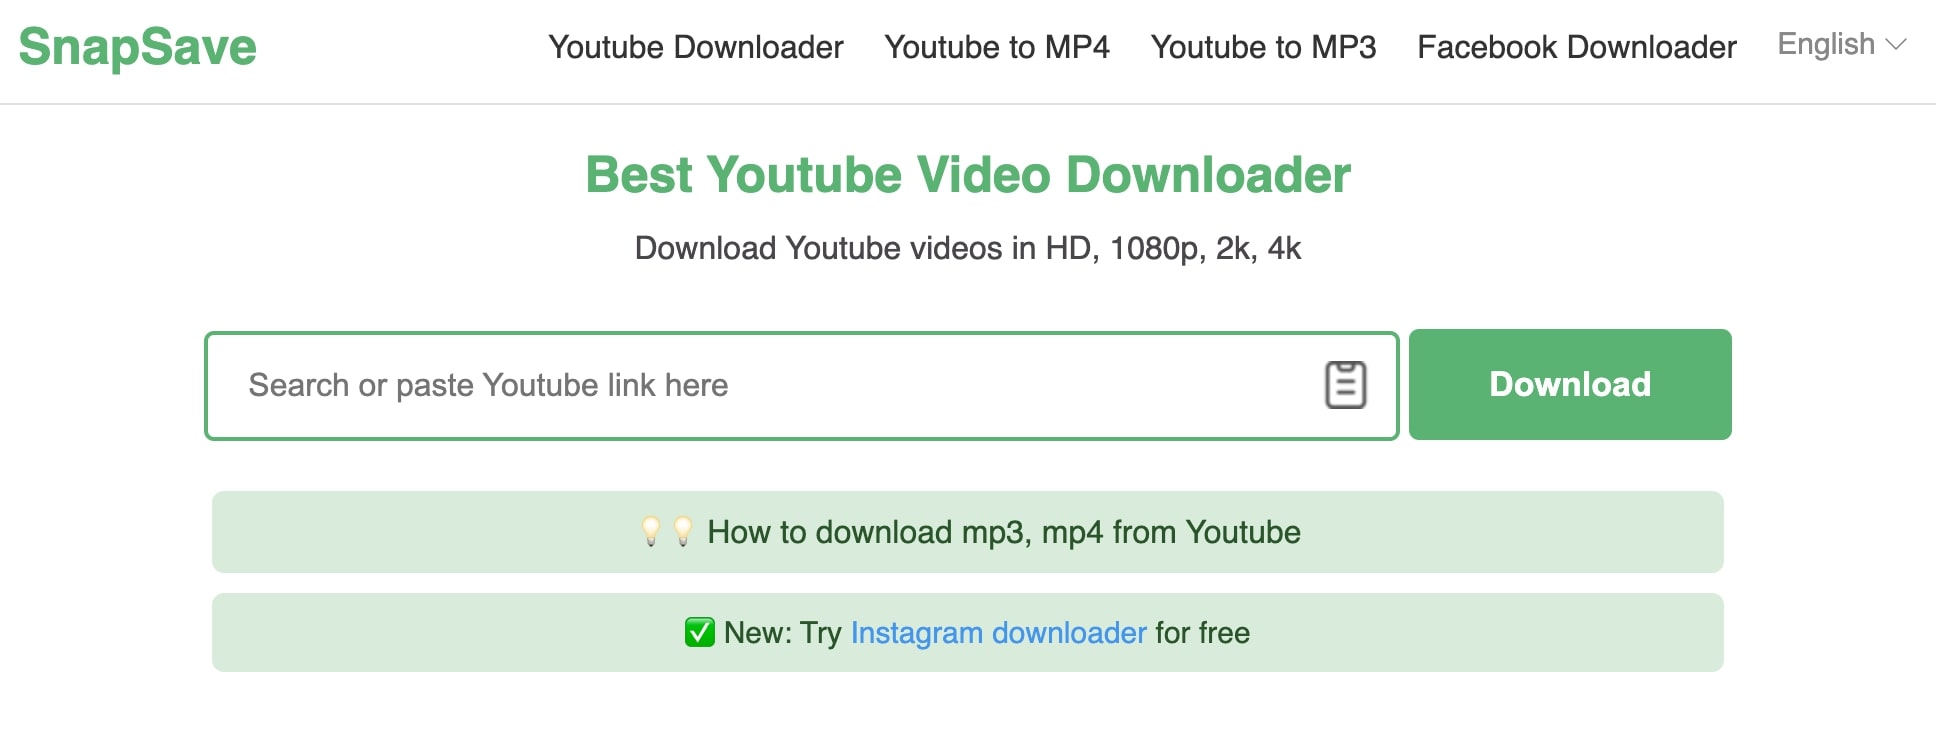  YouTube-Music-Downloader-Snapsave  